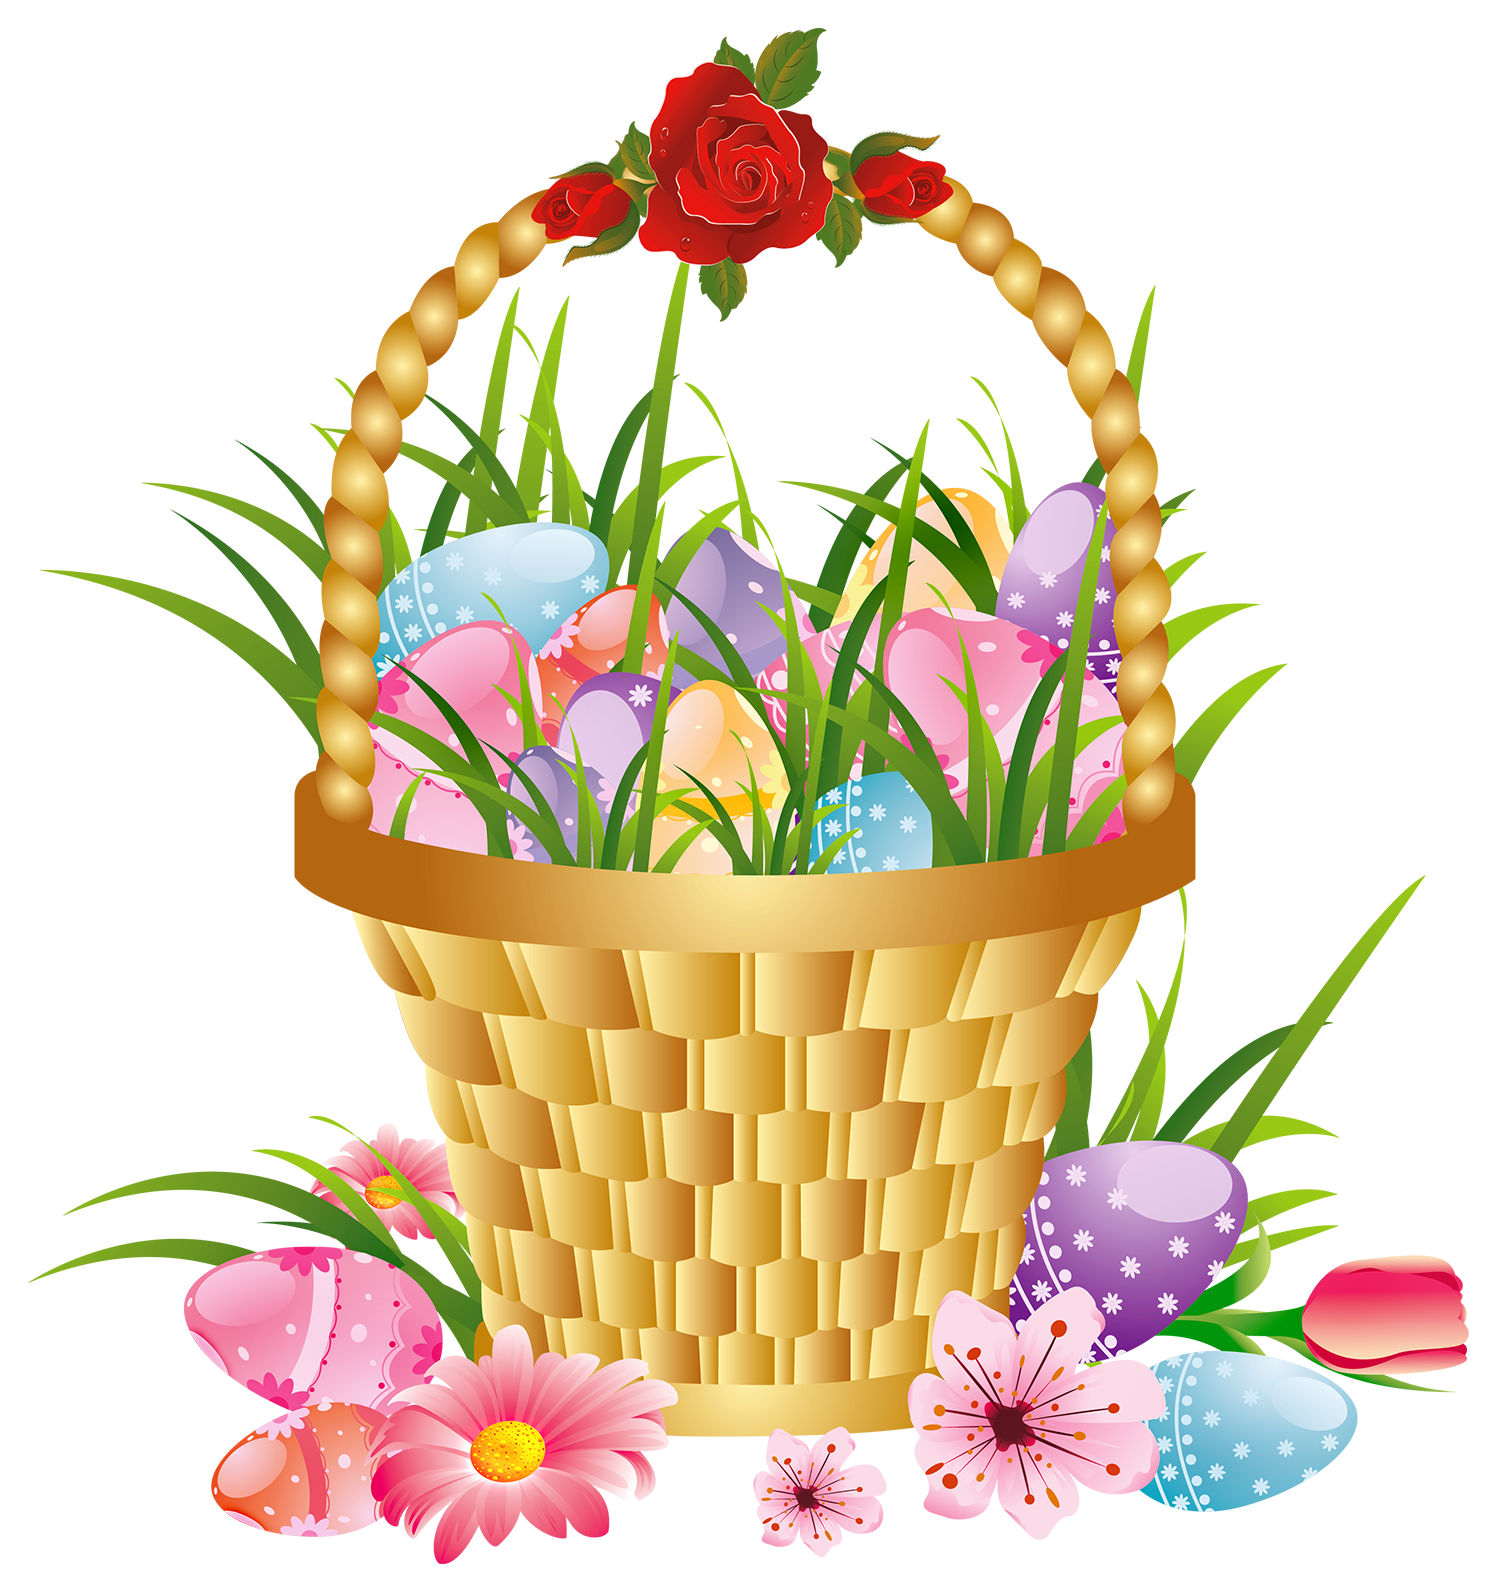 we have pre-made Easter flower arrangements and baskets that serve as an easy decorating piece and double as wonderful gifts